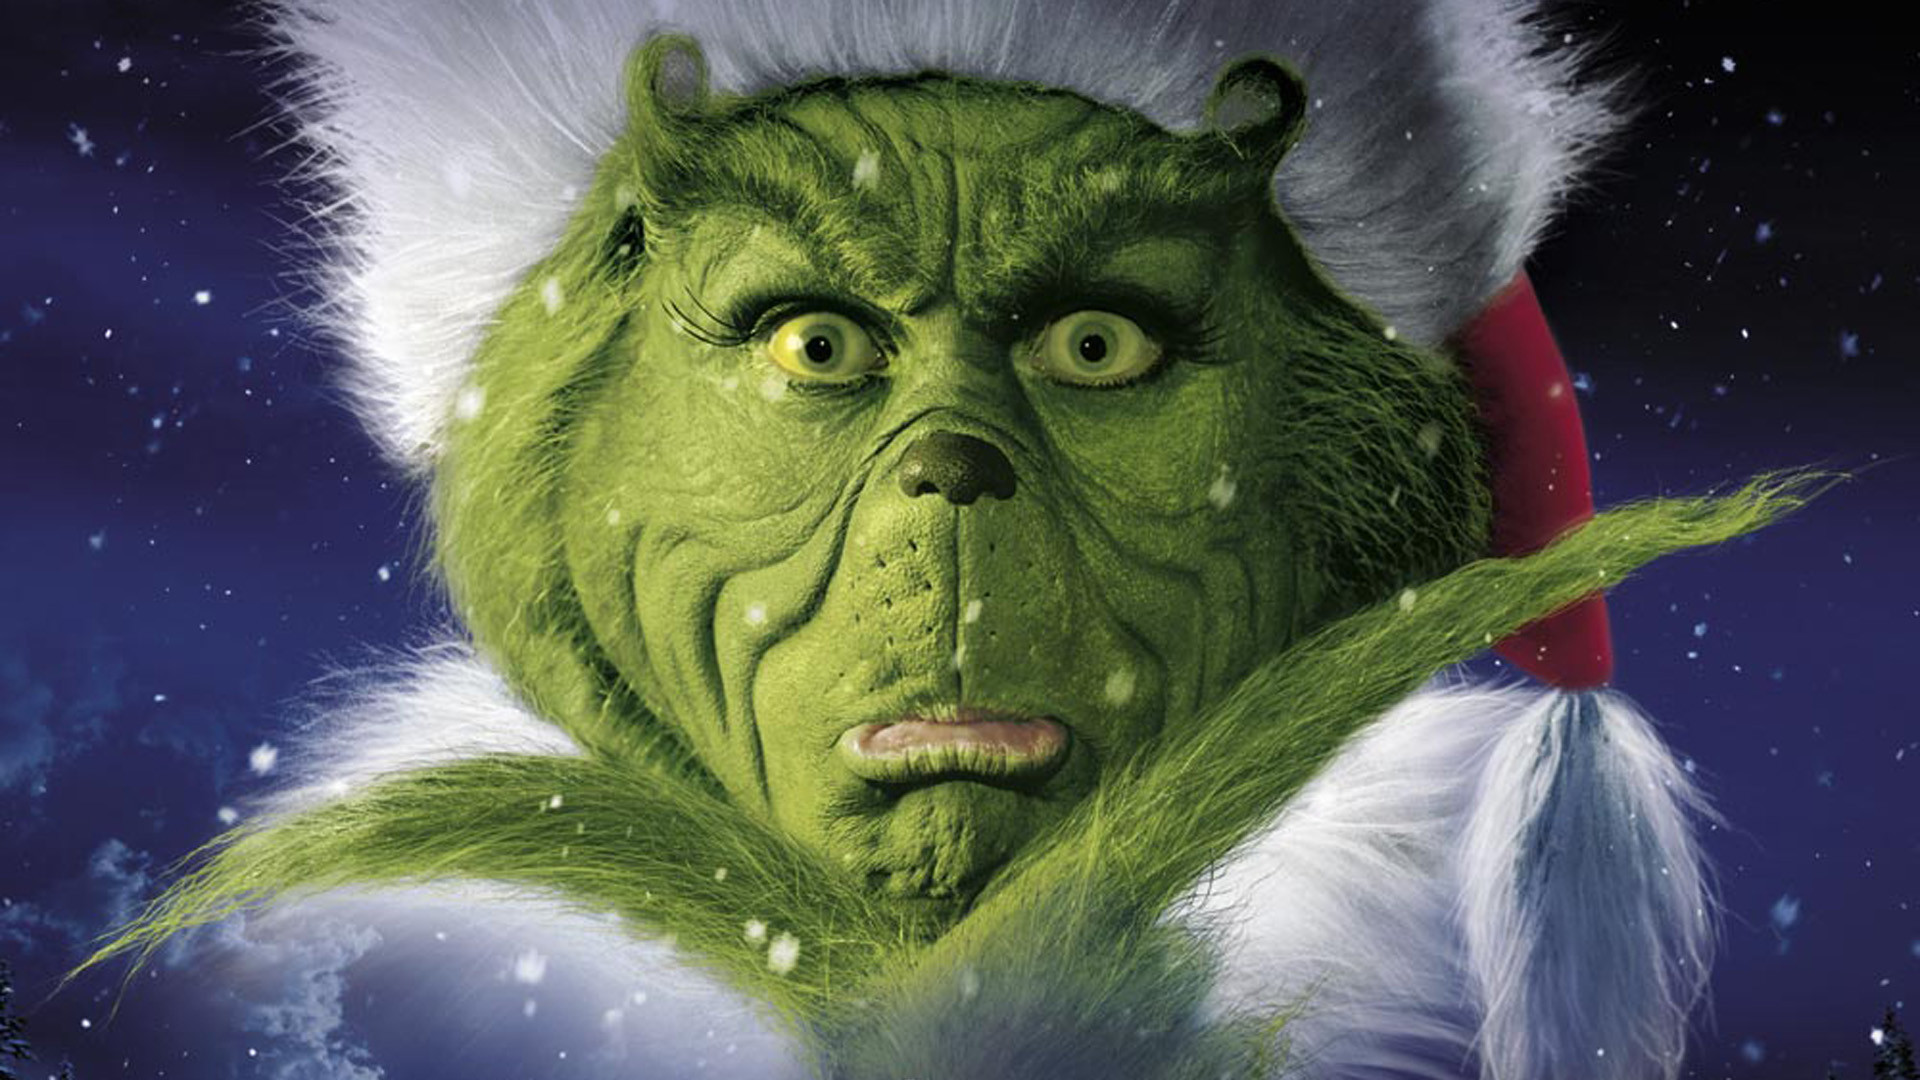 The Grinch Wallpaper Search Results Calendar